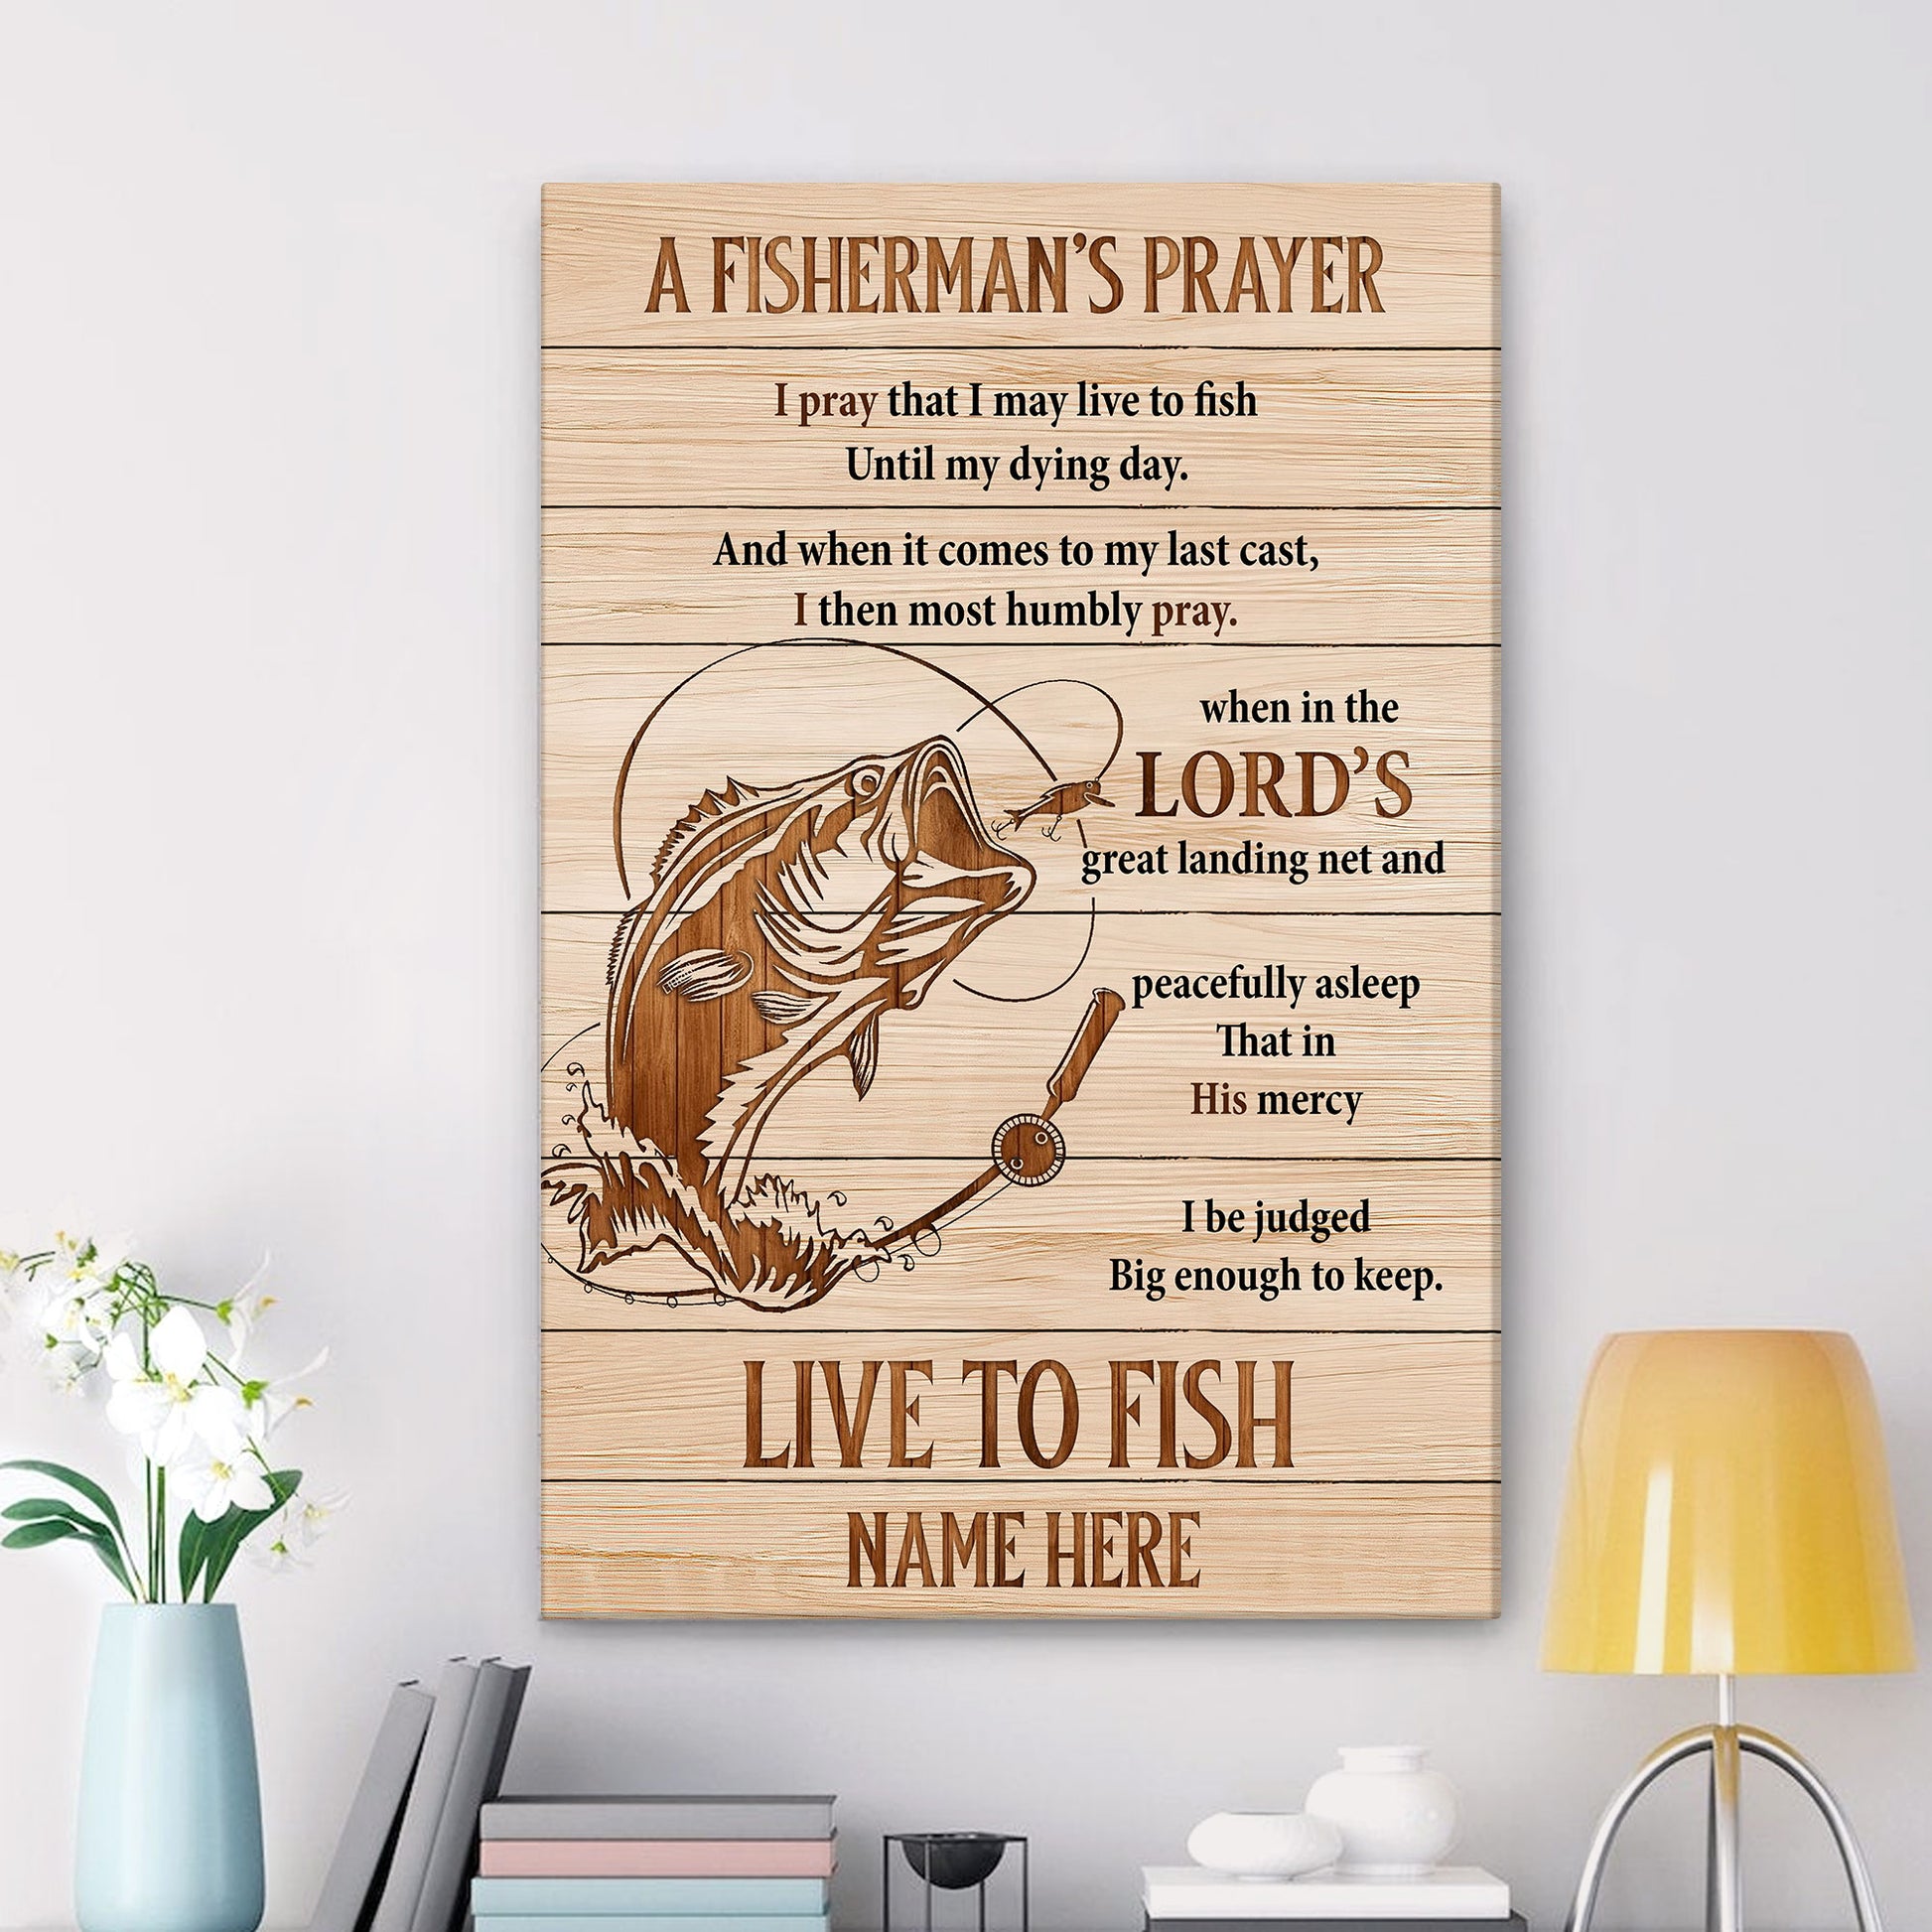 Personalized Fishing Poster & Canvas, A Fisherman's Prayer Wall